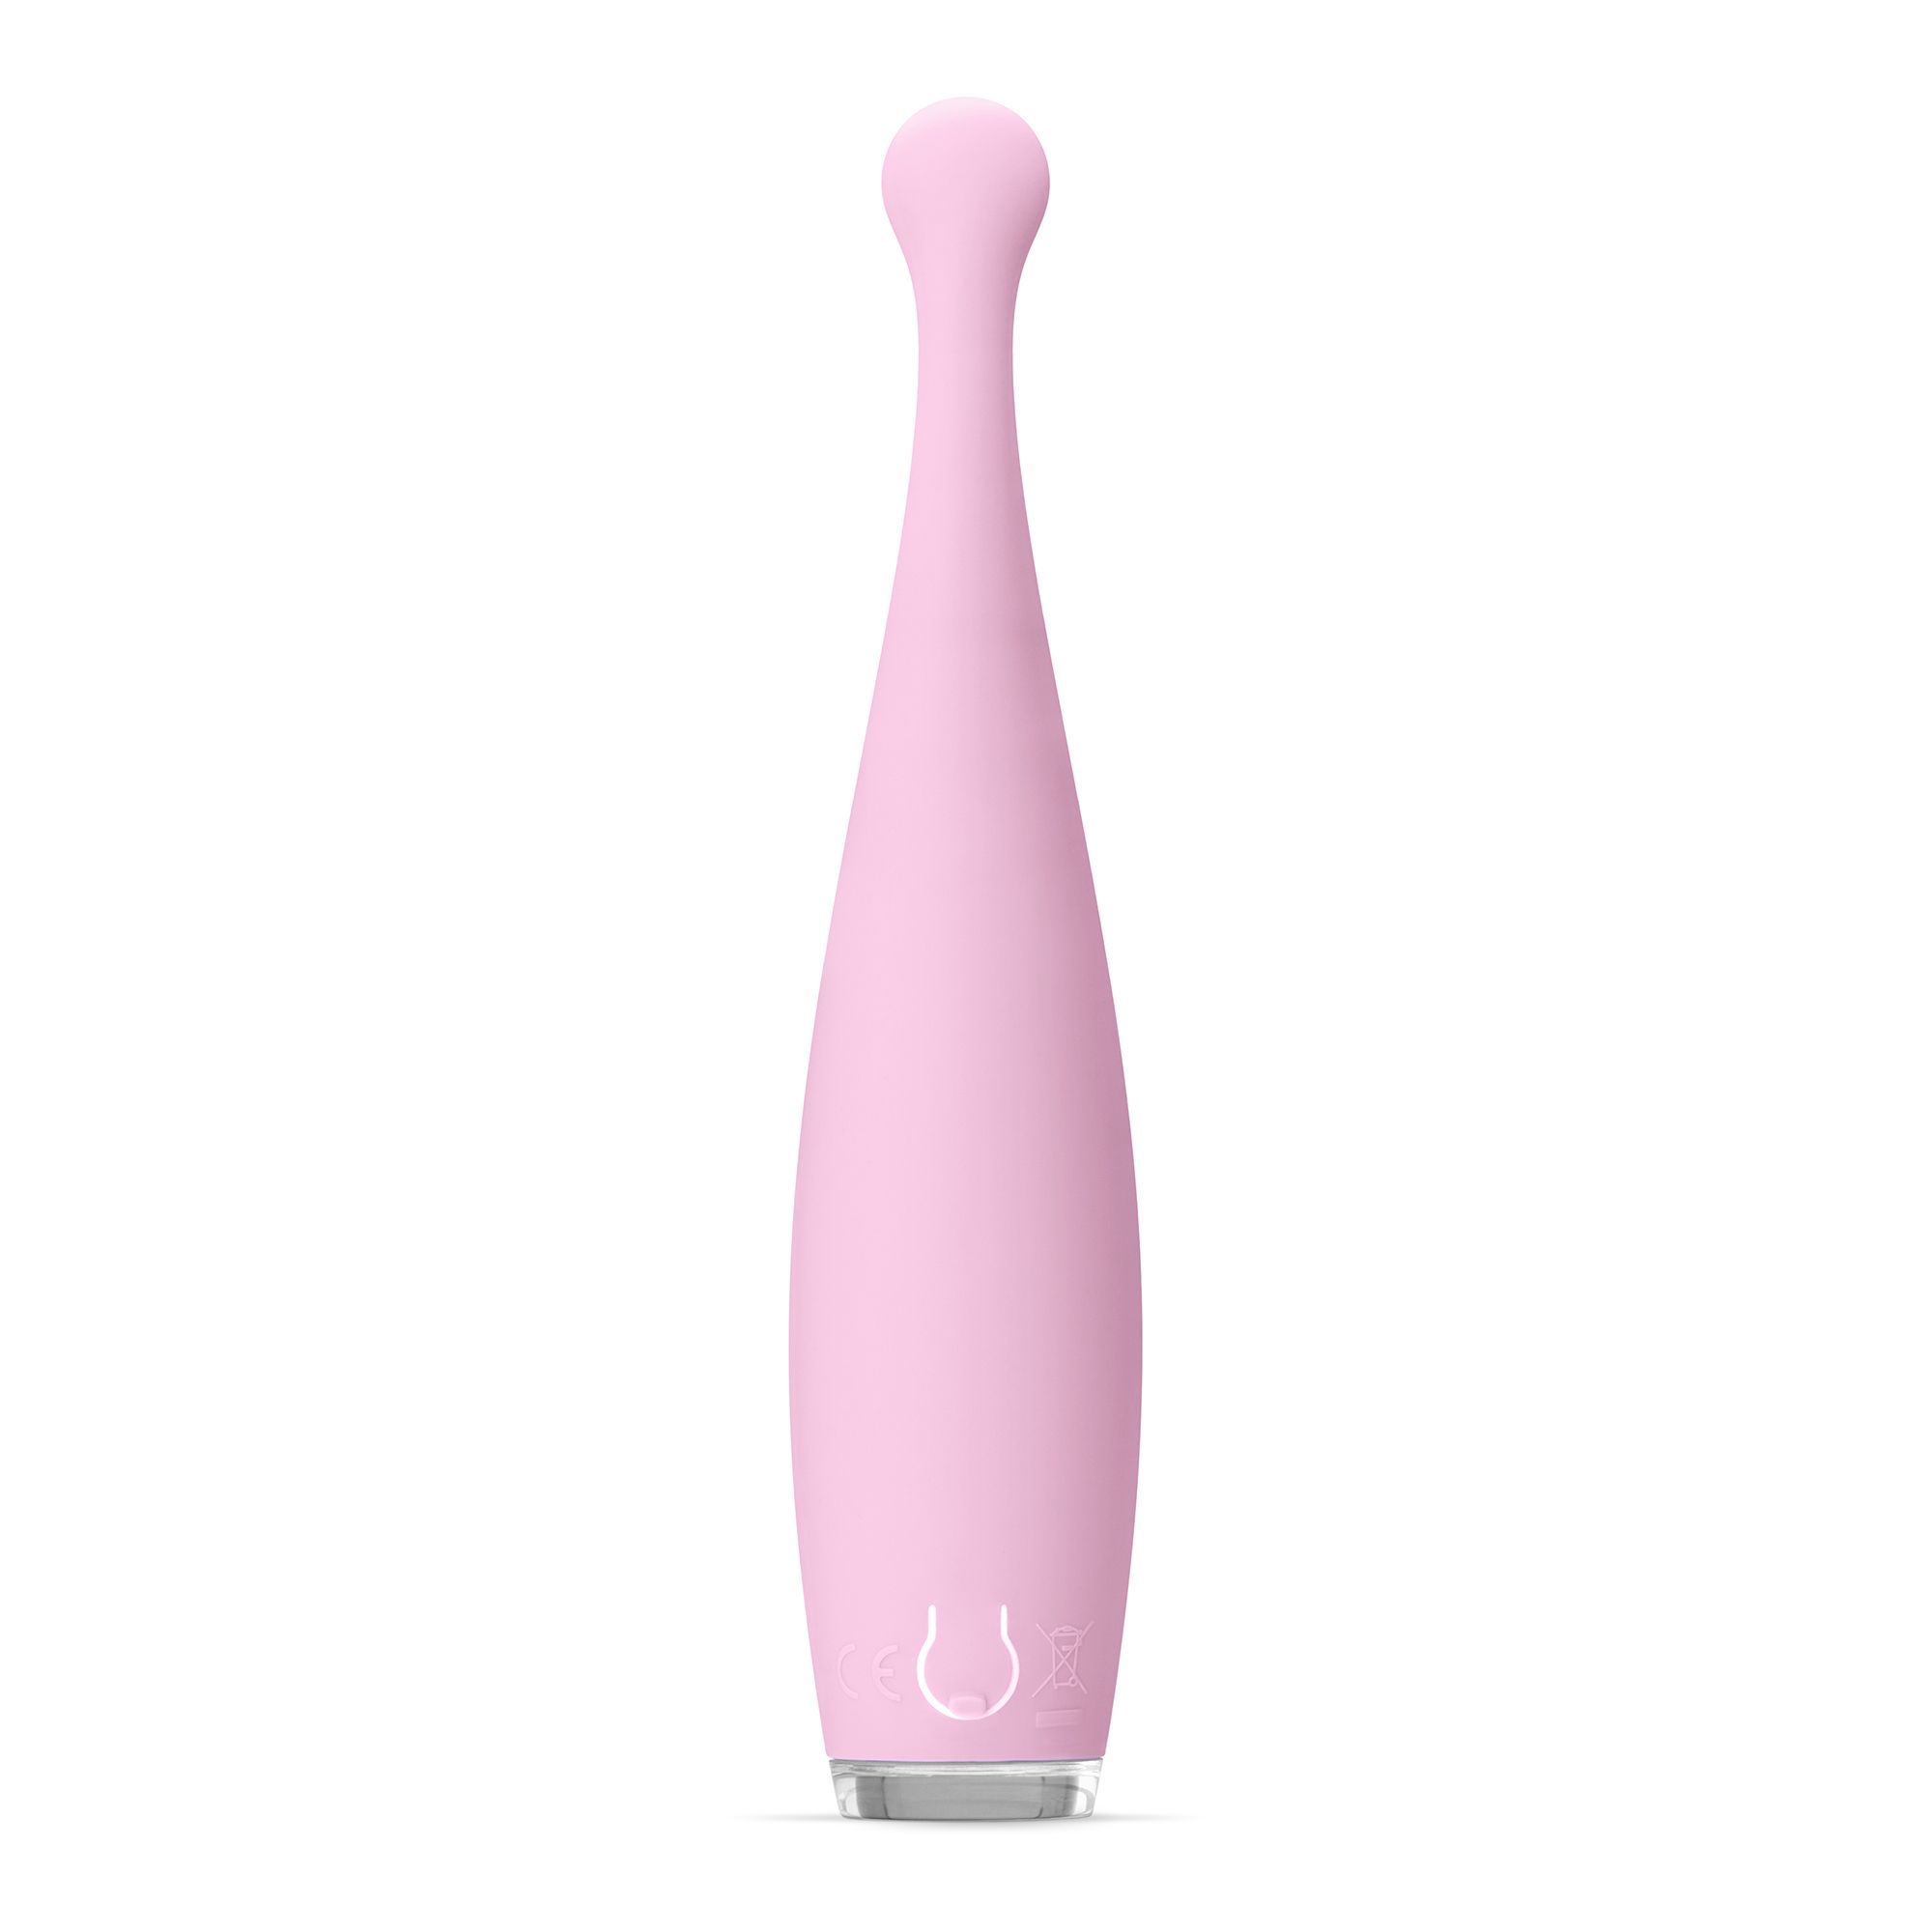     Foreo Issa Mikro, Pearl Pink